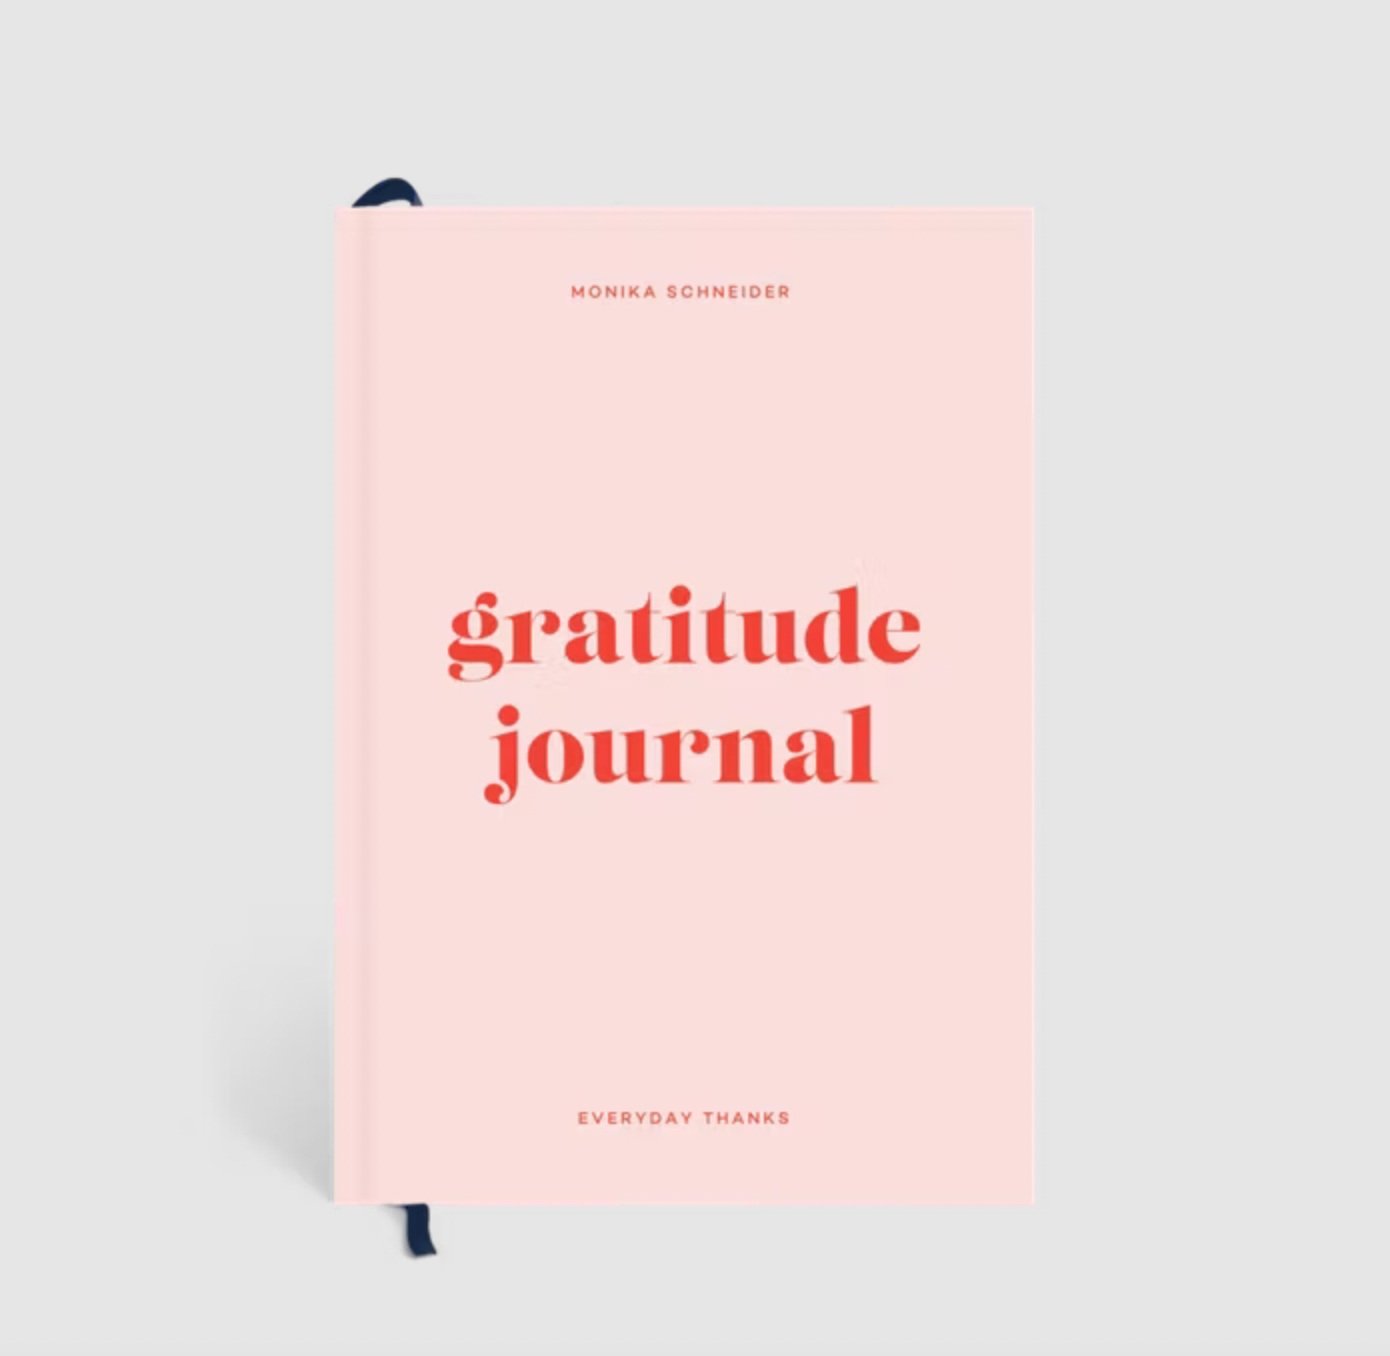 Gratitude Journal everyday thanks to invite hapiness and reduce anxiety